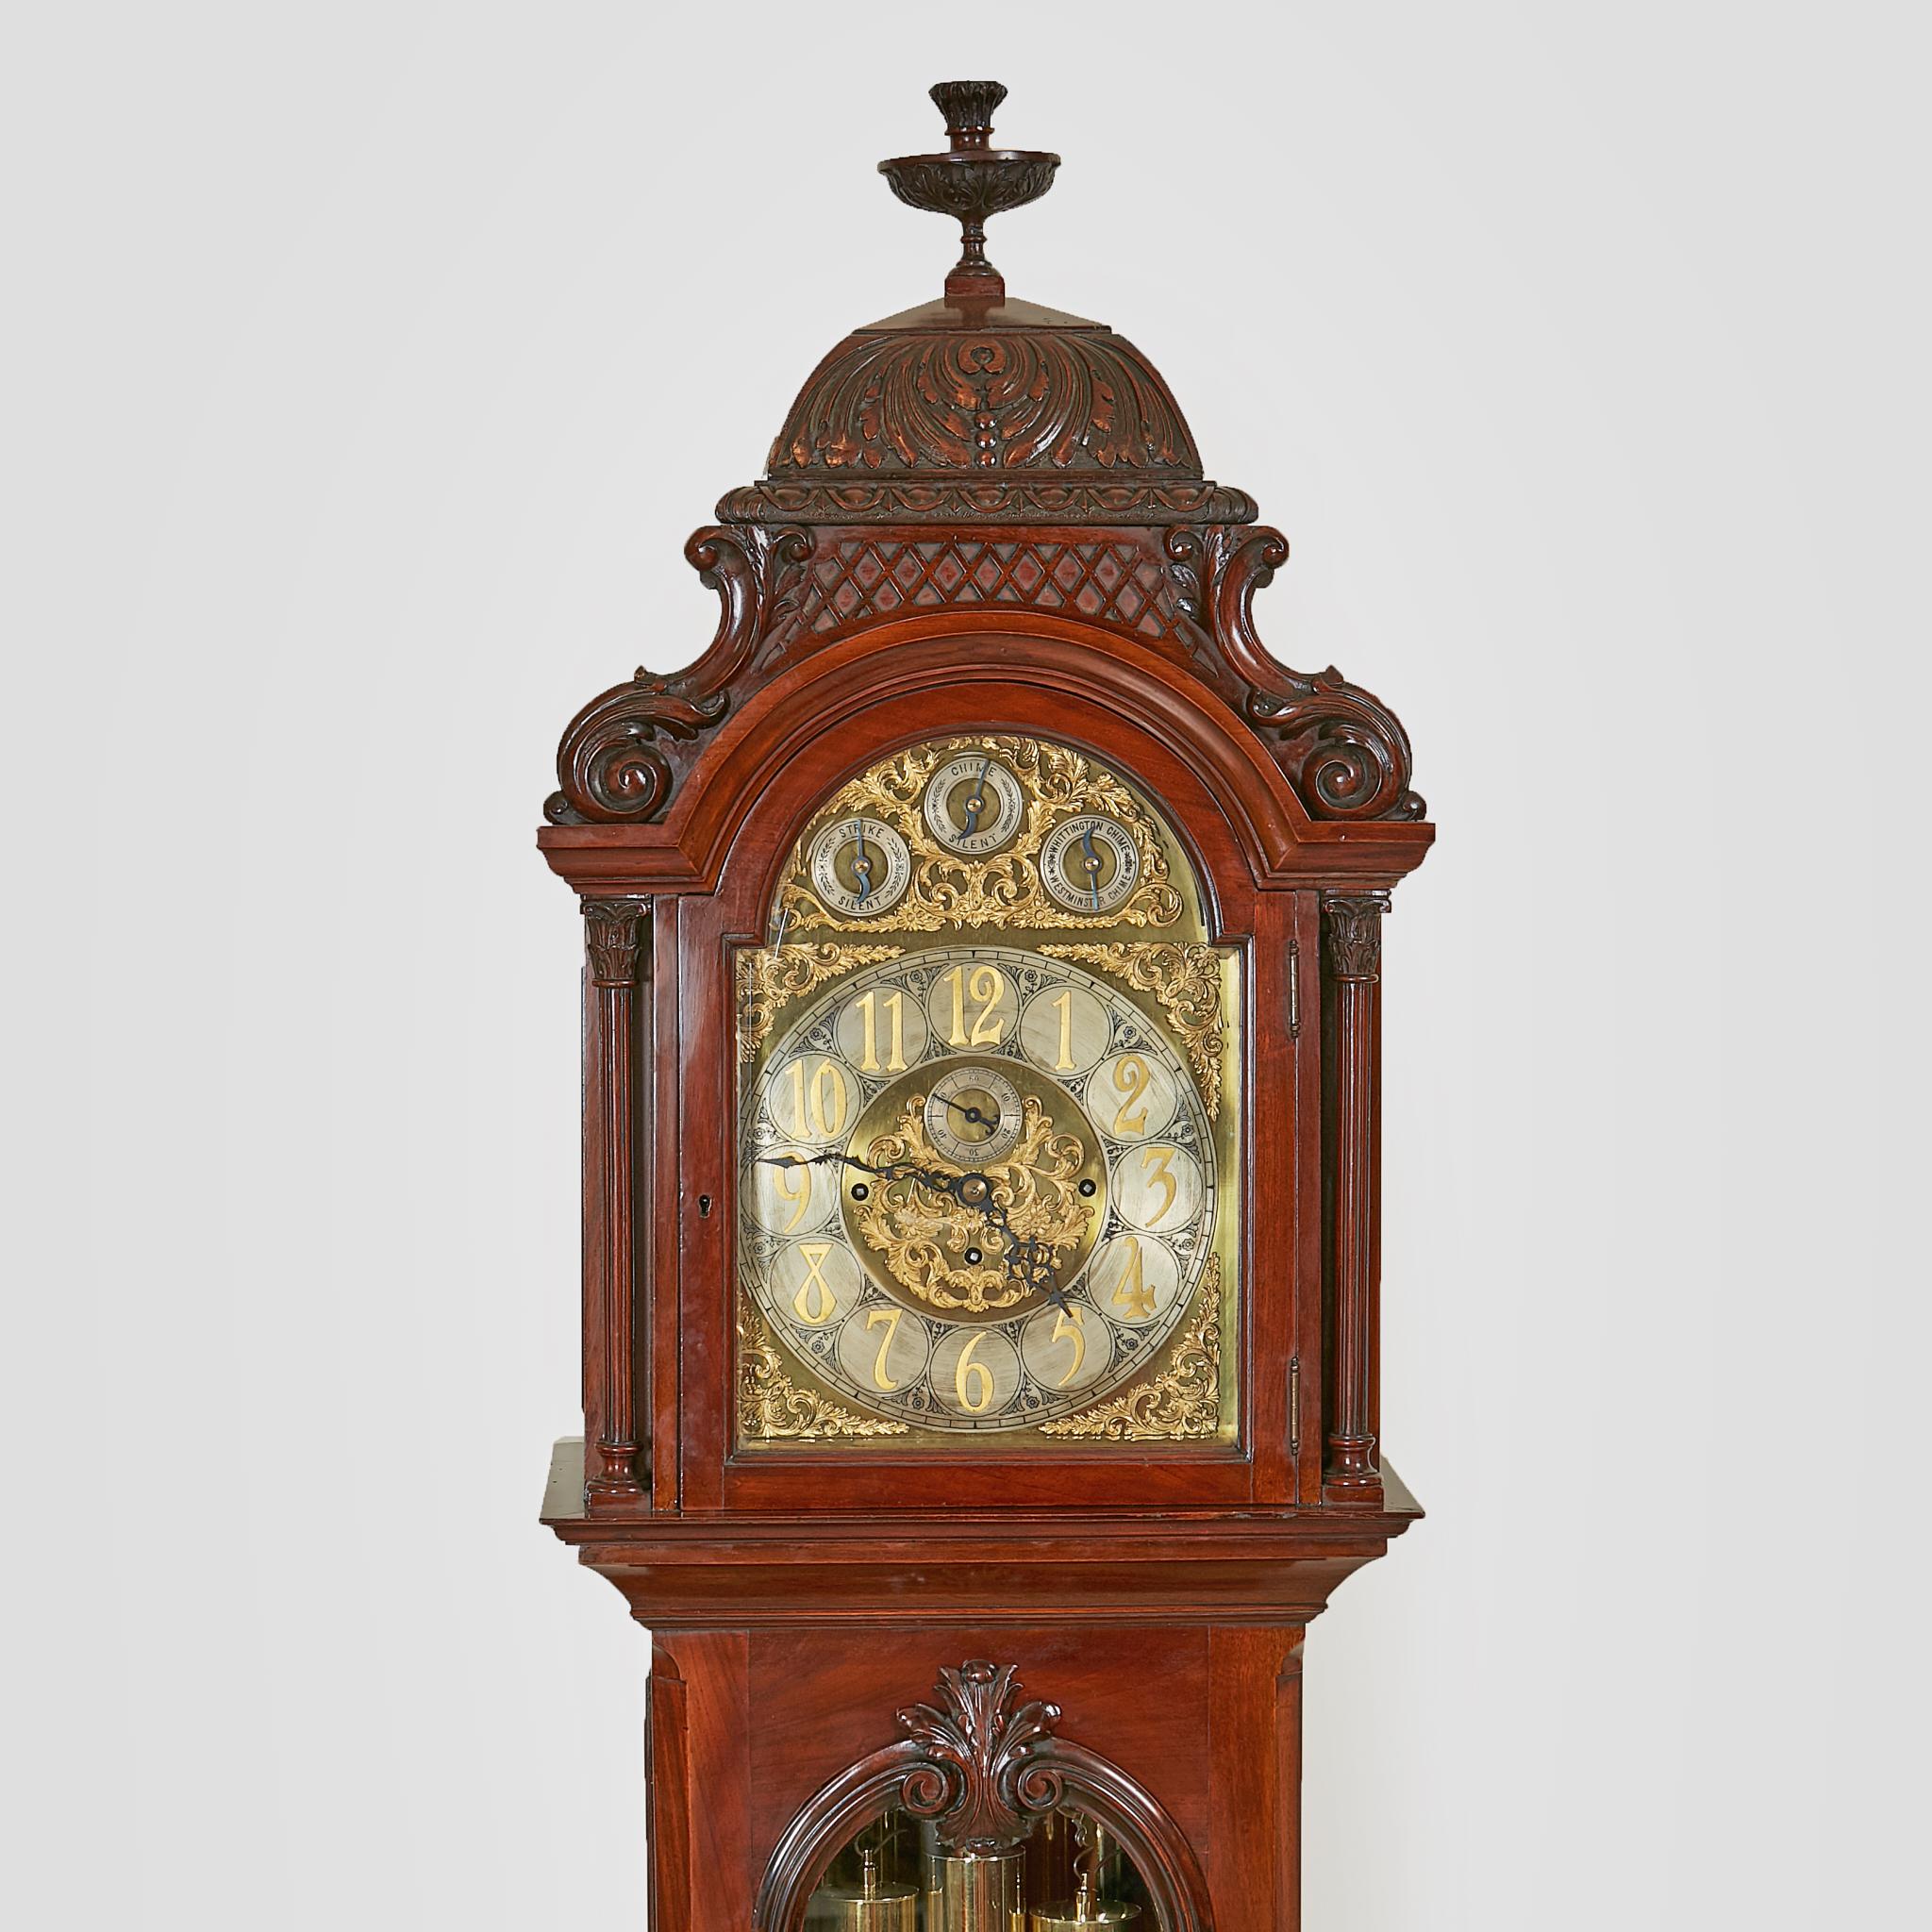 A spectacular late 19th century longcase Grandfather clock with an eight day movement and chiming on nine brass tubes. The very elaborate designed face with Arabic Numerals enclosing a subsidiary seconds dial in the center, a small switch to the